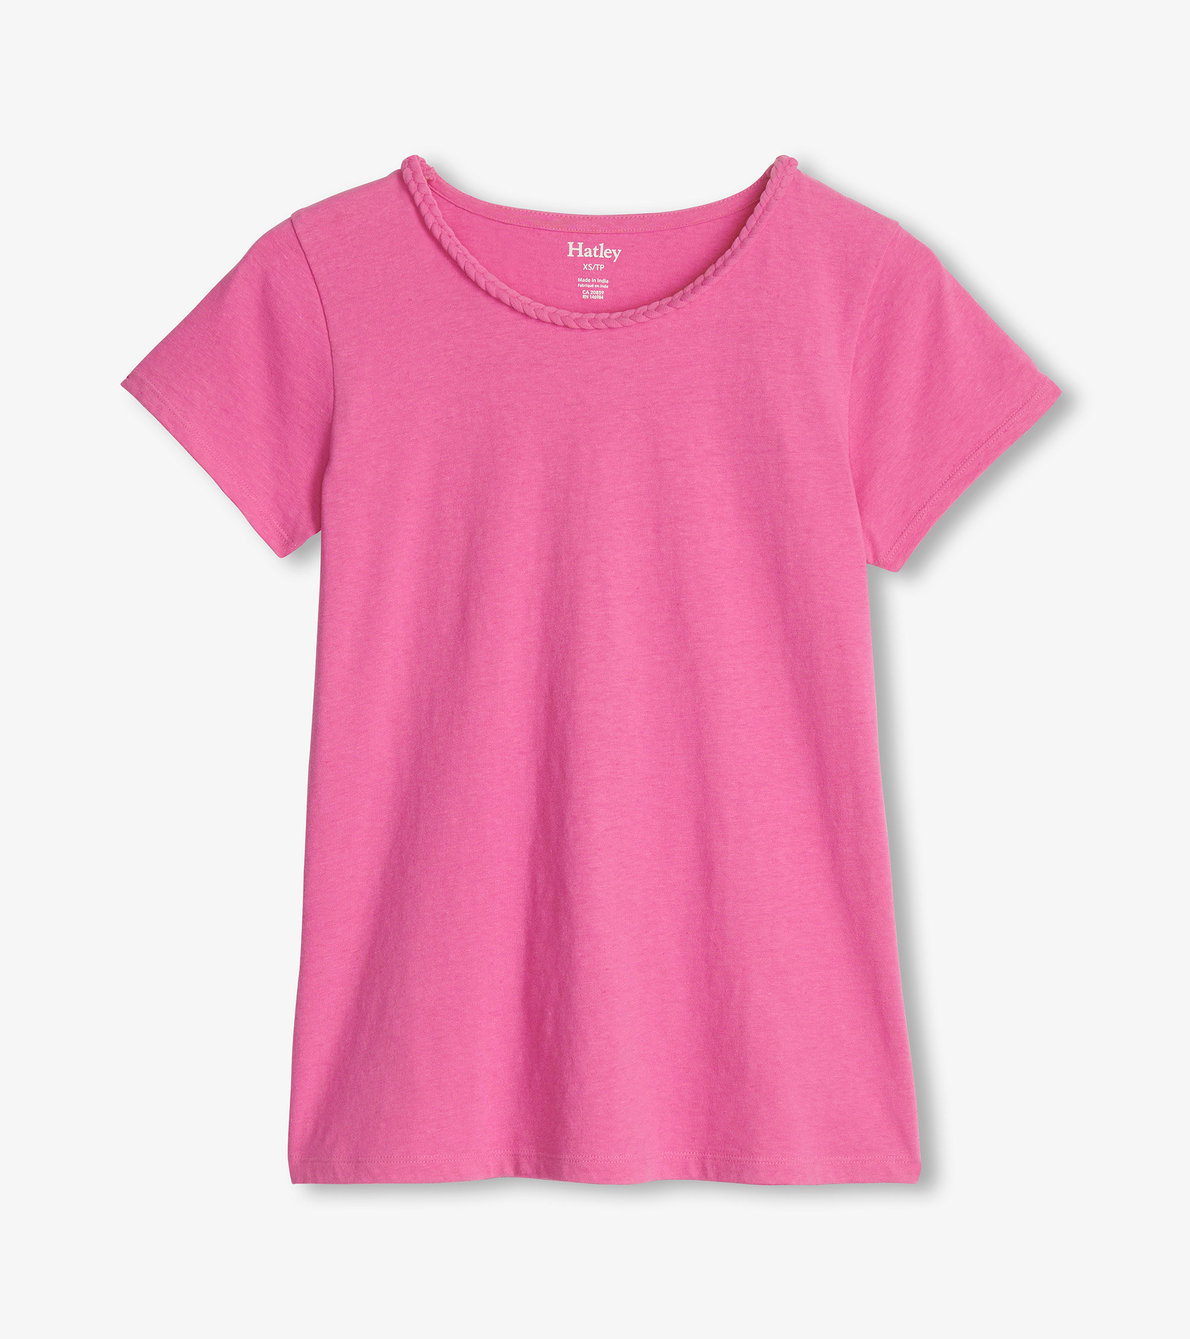 View larger image of Braided Neck Tee - Phlox Pink